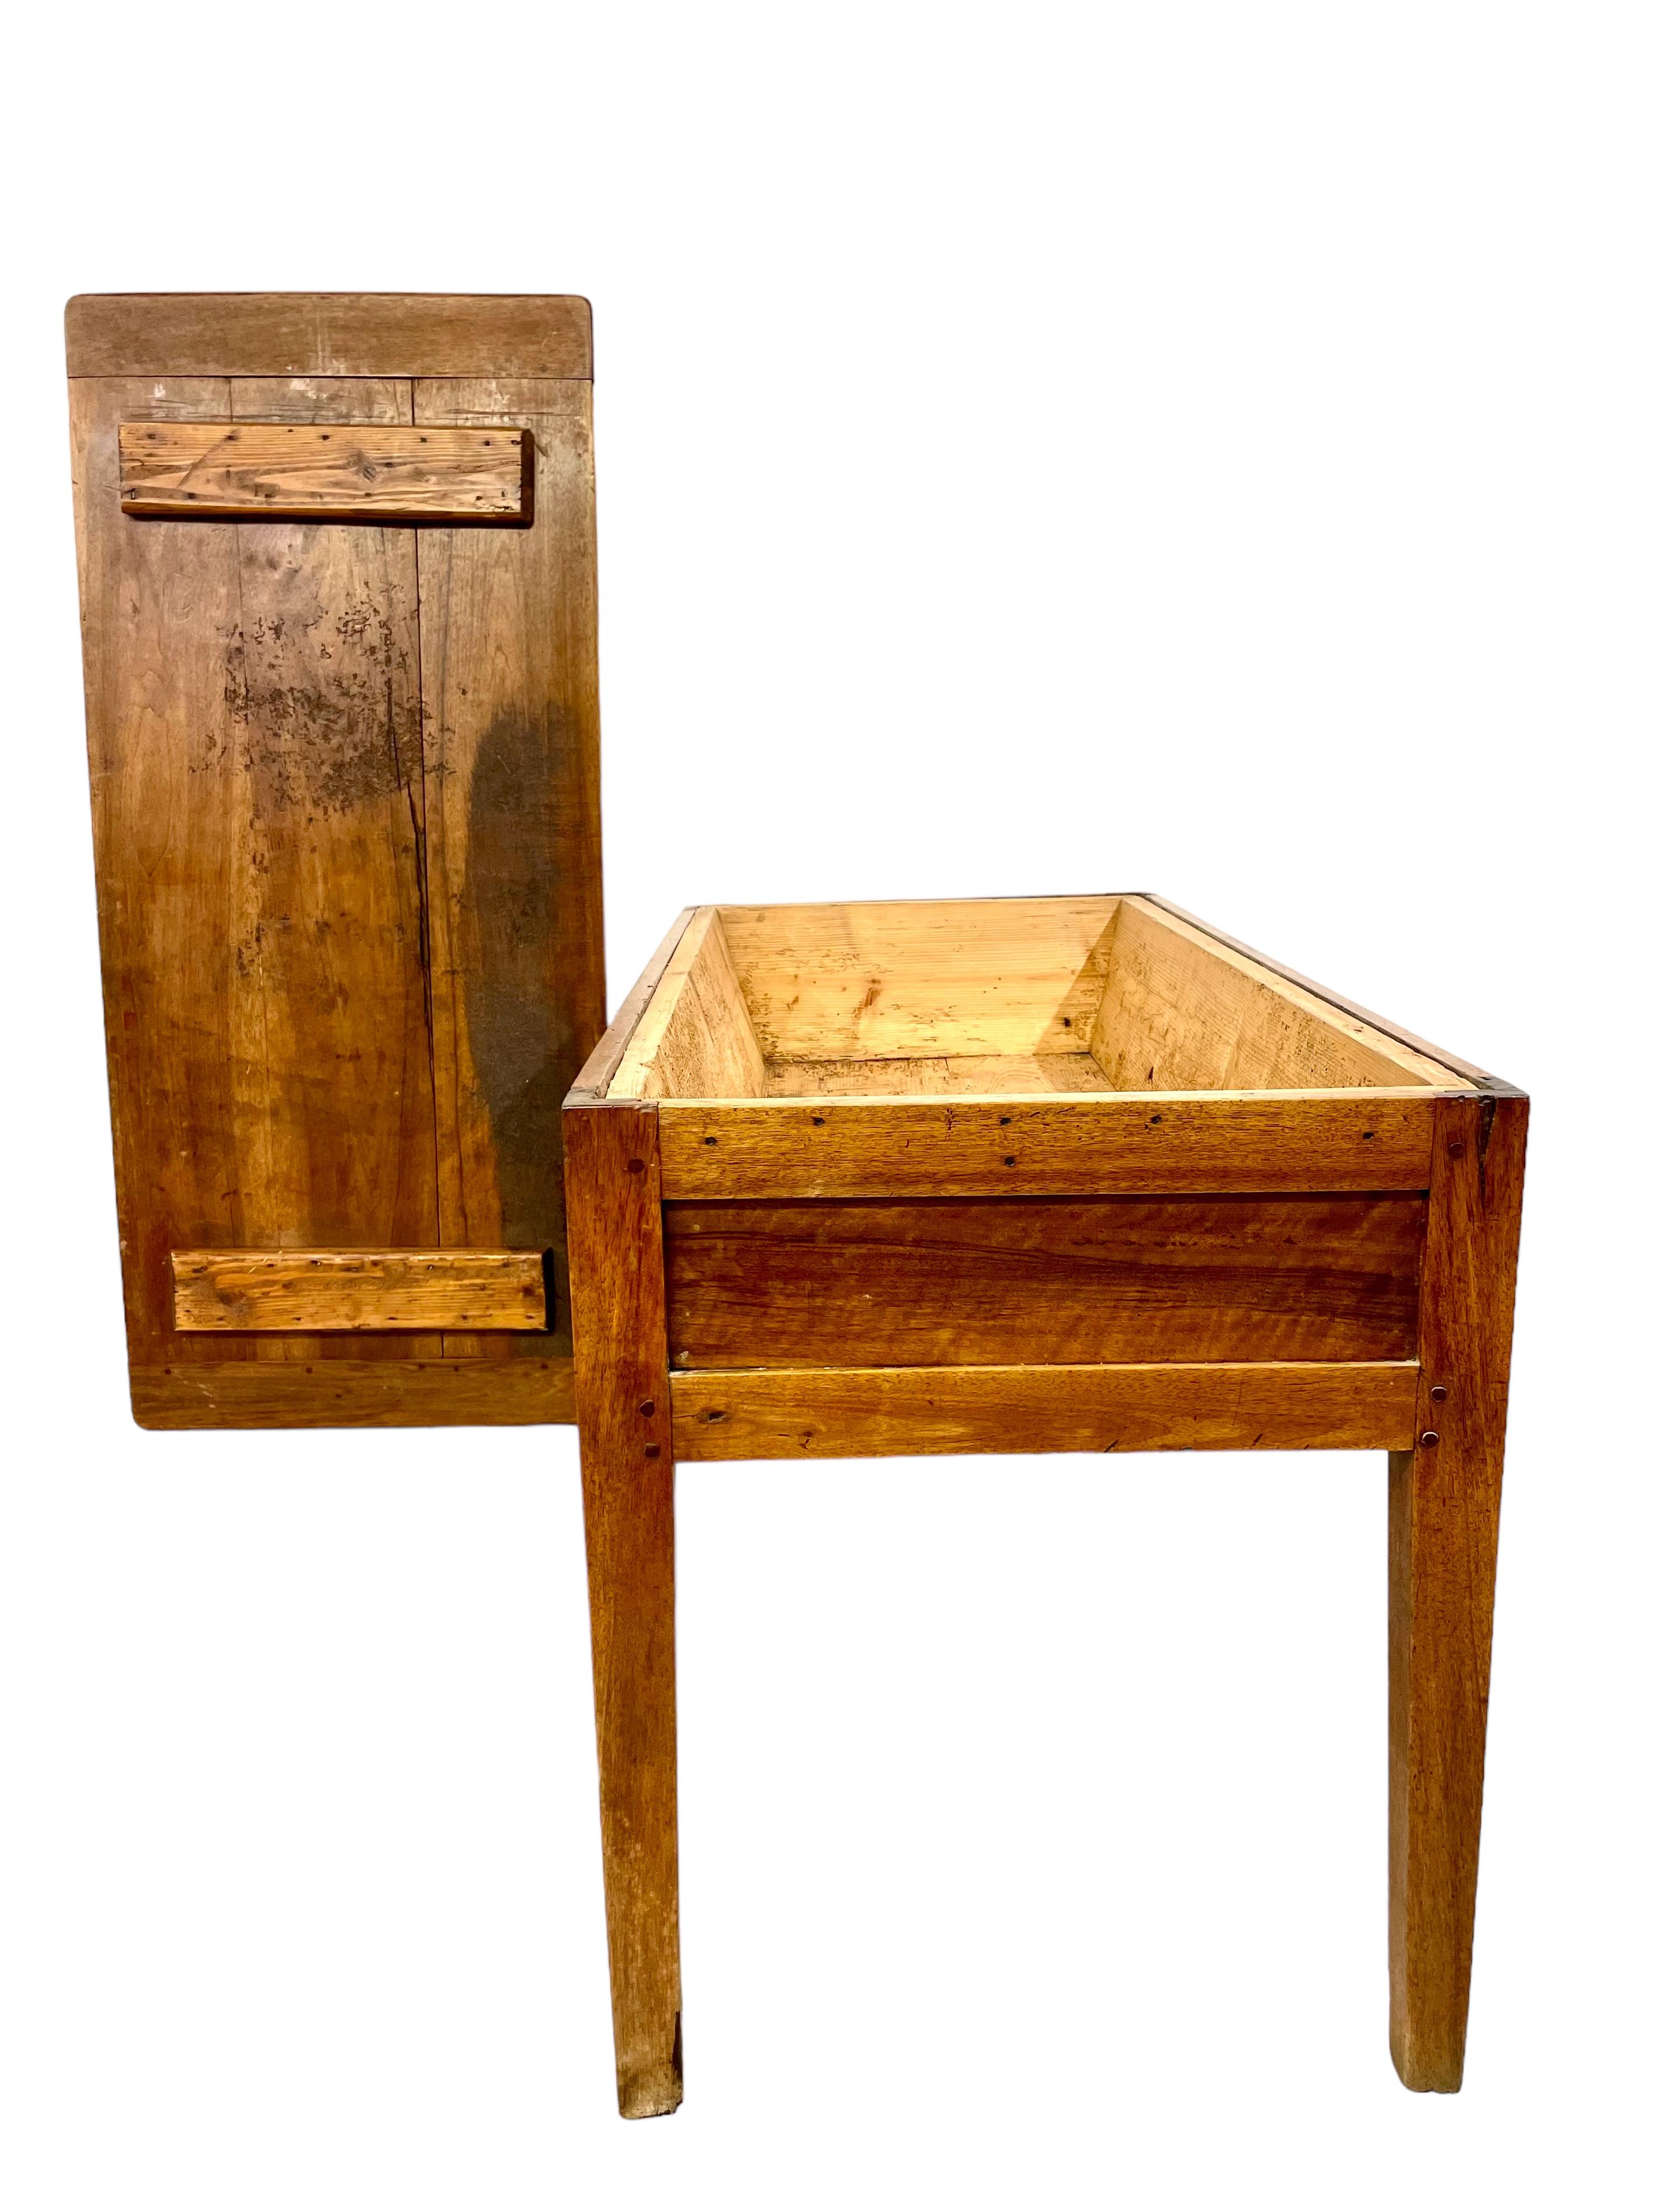 Wood  19th Century French Pétrin or Kneading Table For Sale